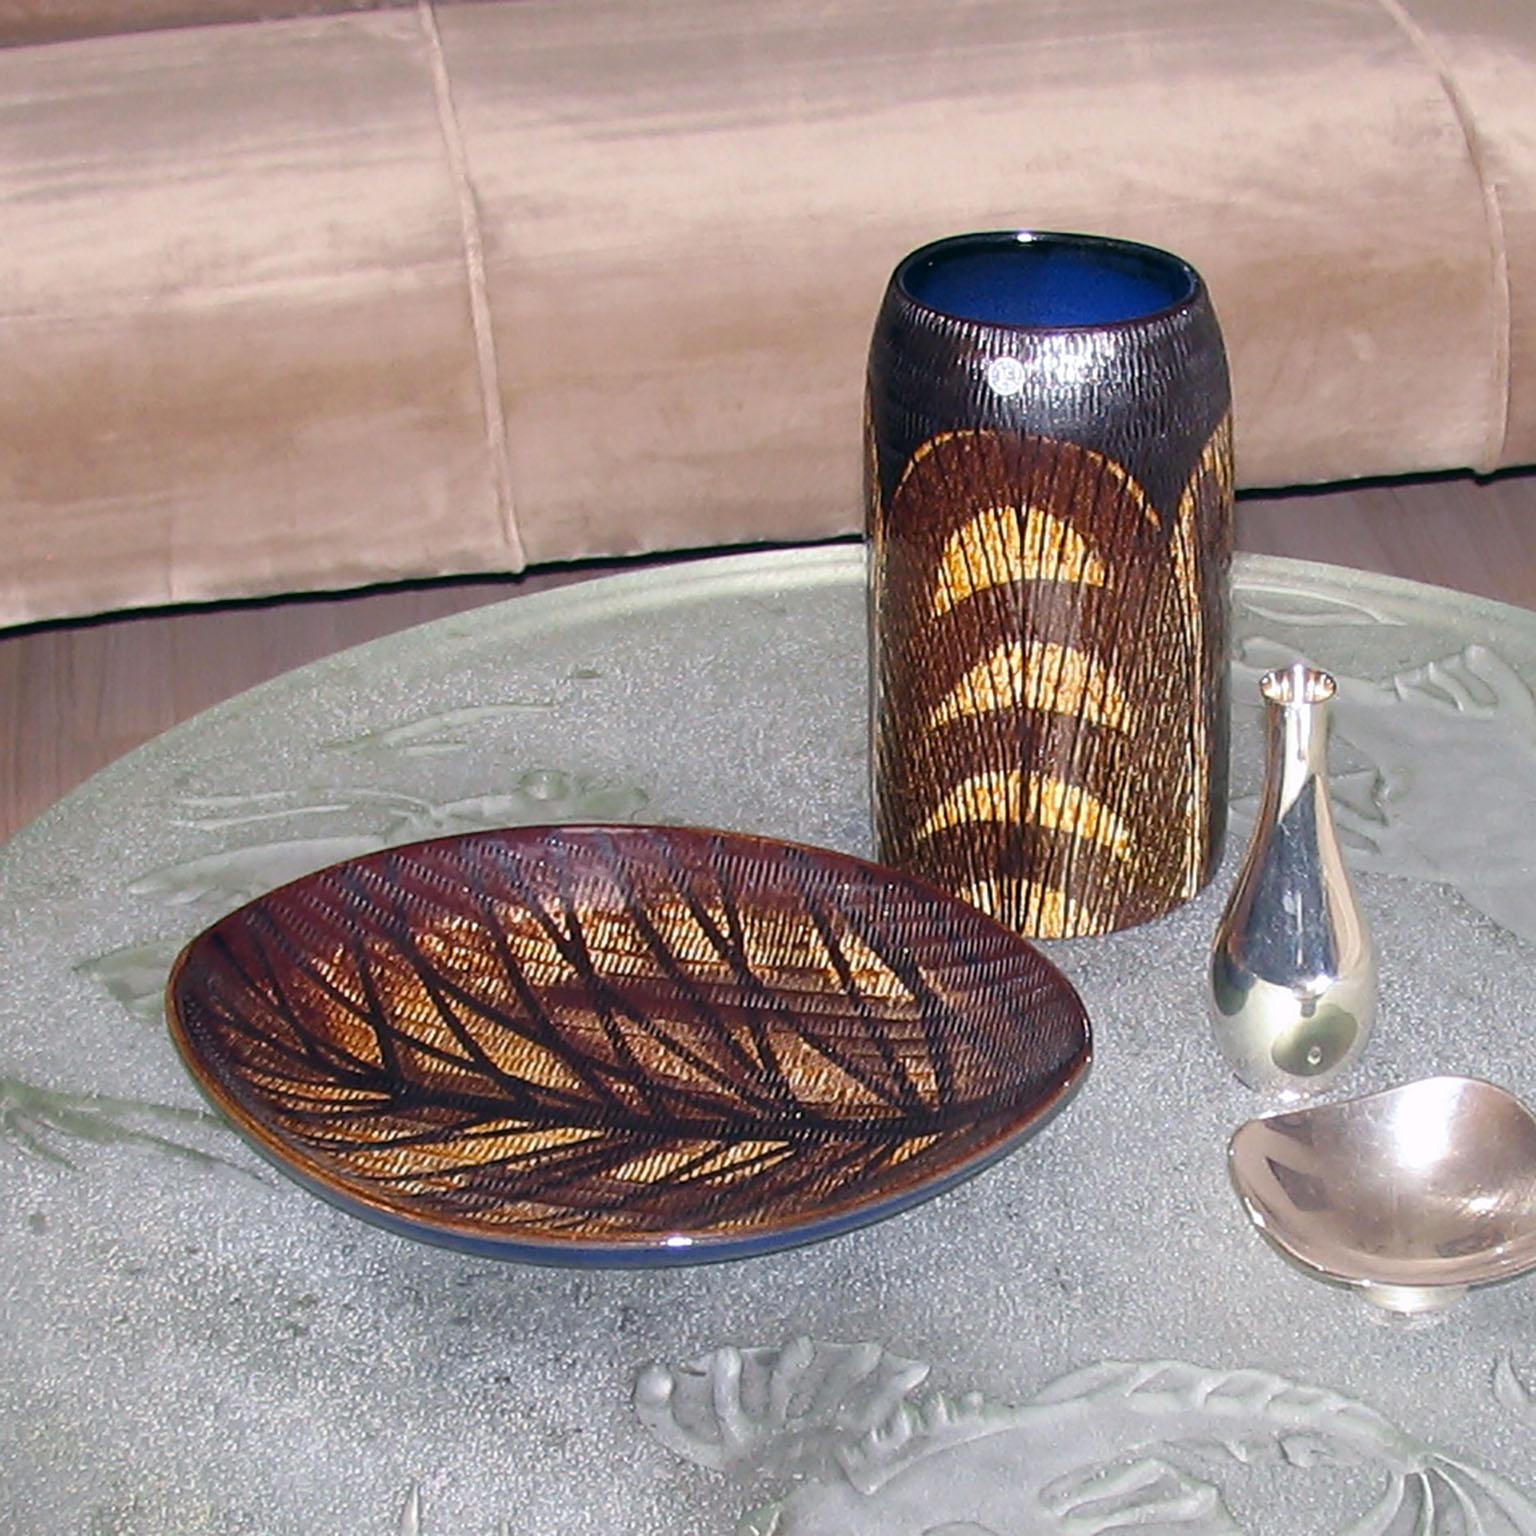 Mid-Century Modern Scandinavian ceramic vase and tray.
Amazing pottery of the 1960s by Ingrid Atterberg for Upsala Ekeby, depicting a textured leaf motif with brown and yellow contrast, inside of the vase and backside of tray in dark royal blue.